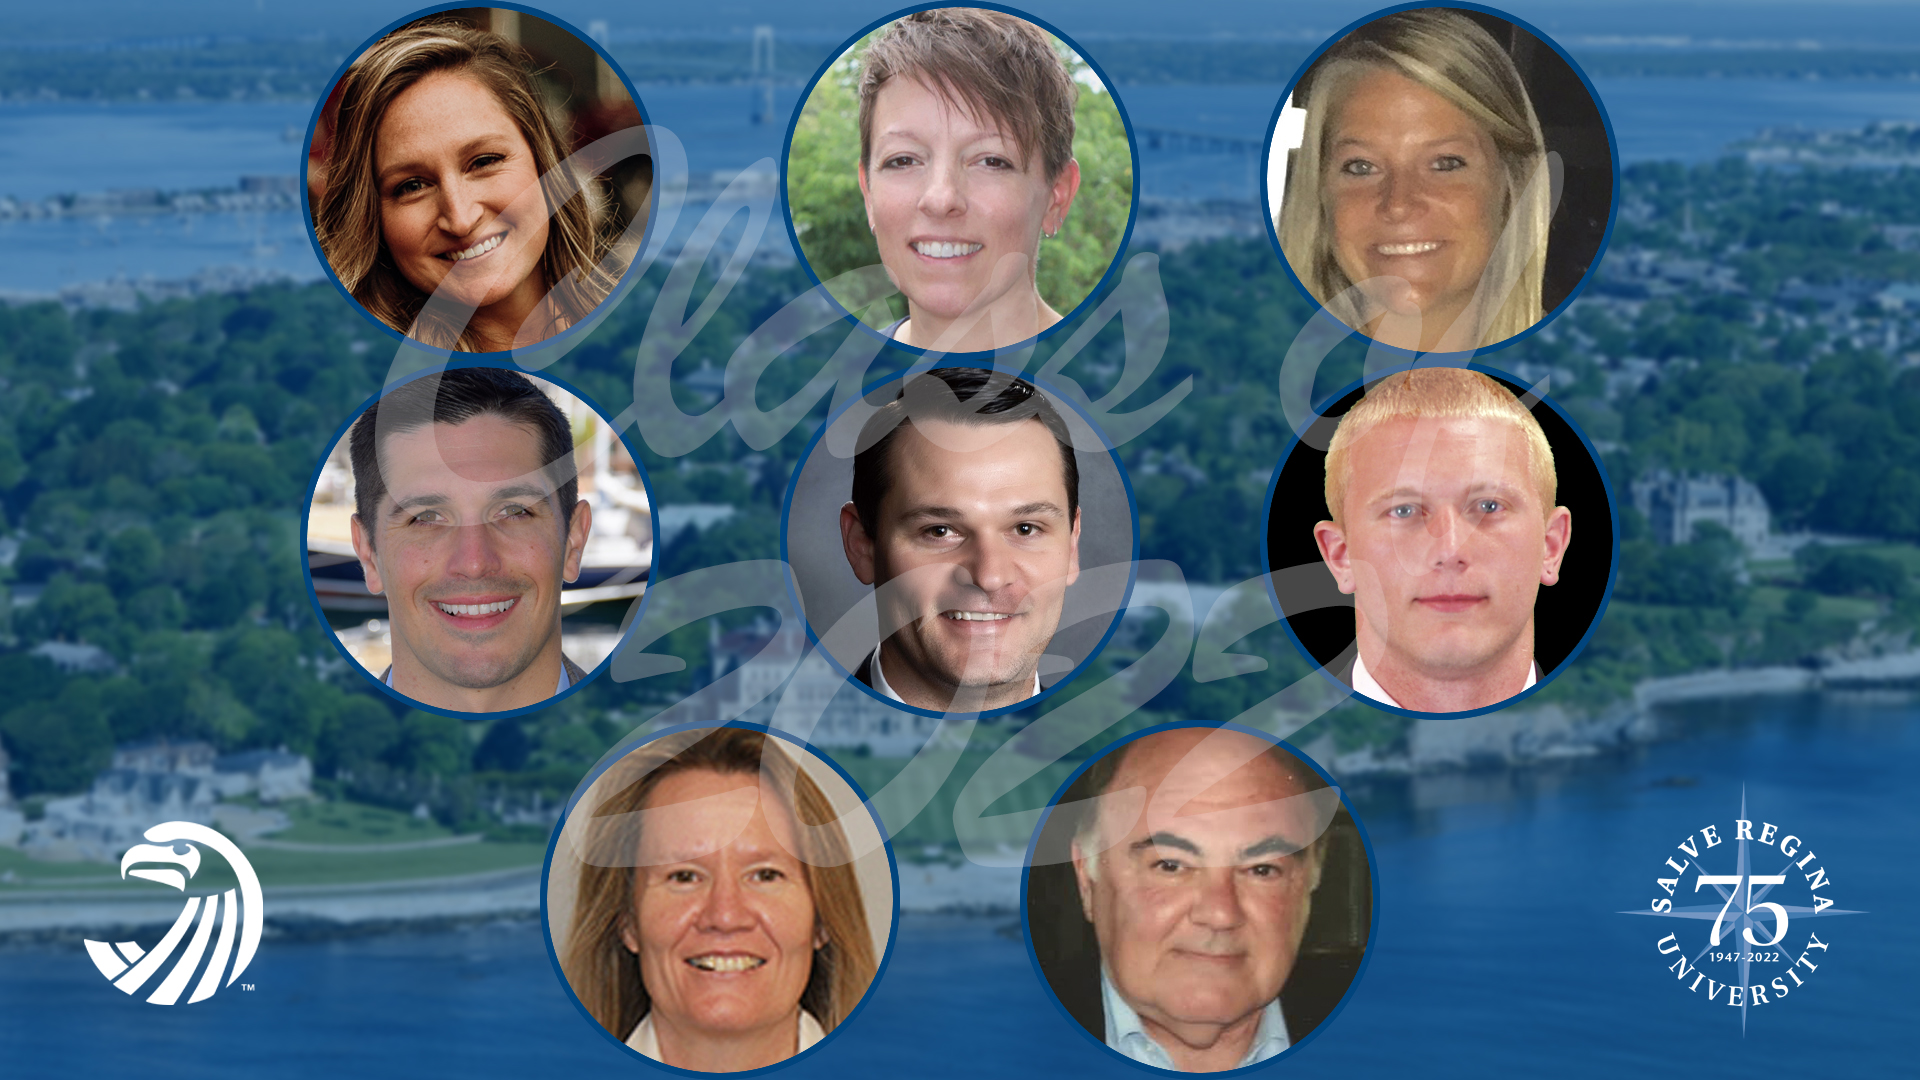 Comprising the Hall of Fame's 14th induction class are six athletes - Kelly Burke '13 (field hockey, lacrosse), Beth Gemma '95 (soccer, basketball), Sarah Jakiela '10 (softball), Ryan Kelly '16 (football, baseball), Brian Walker '09 (lacrosse), Steve Wilken '15 (football) - plus two former coaches and administrators - Trish Cronin and Mick Klitzner.